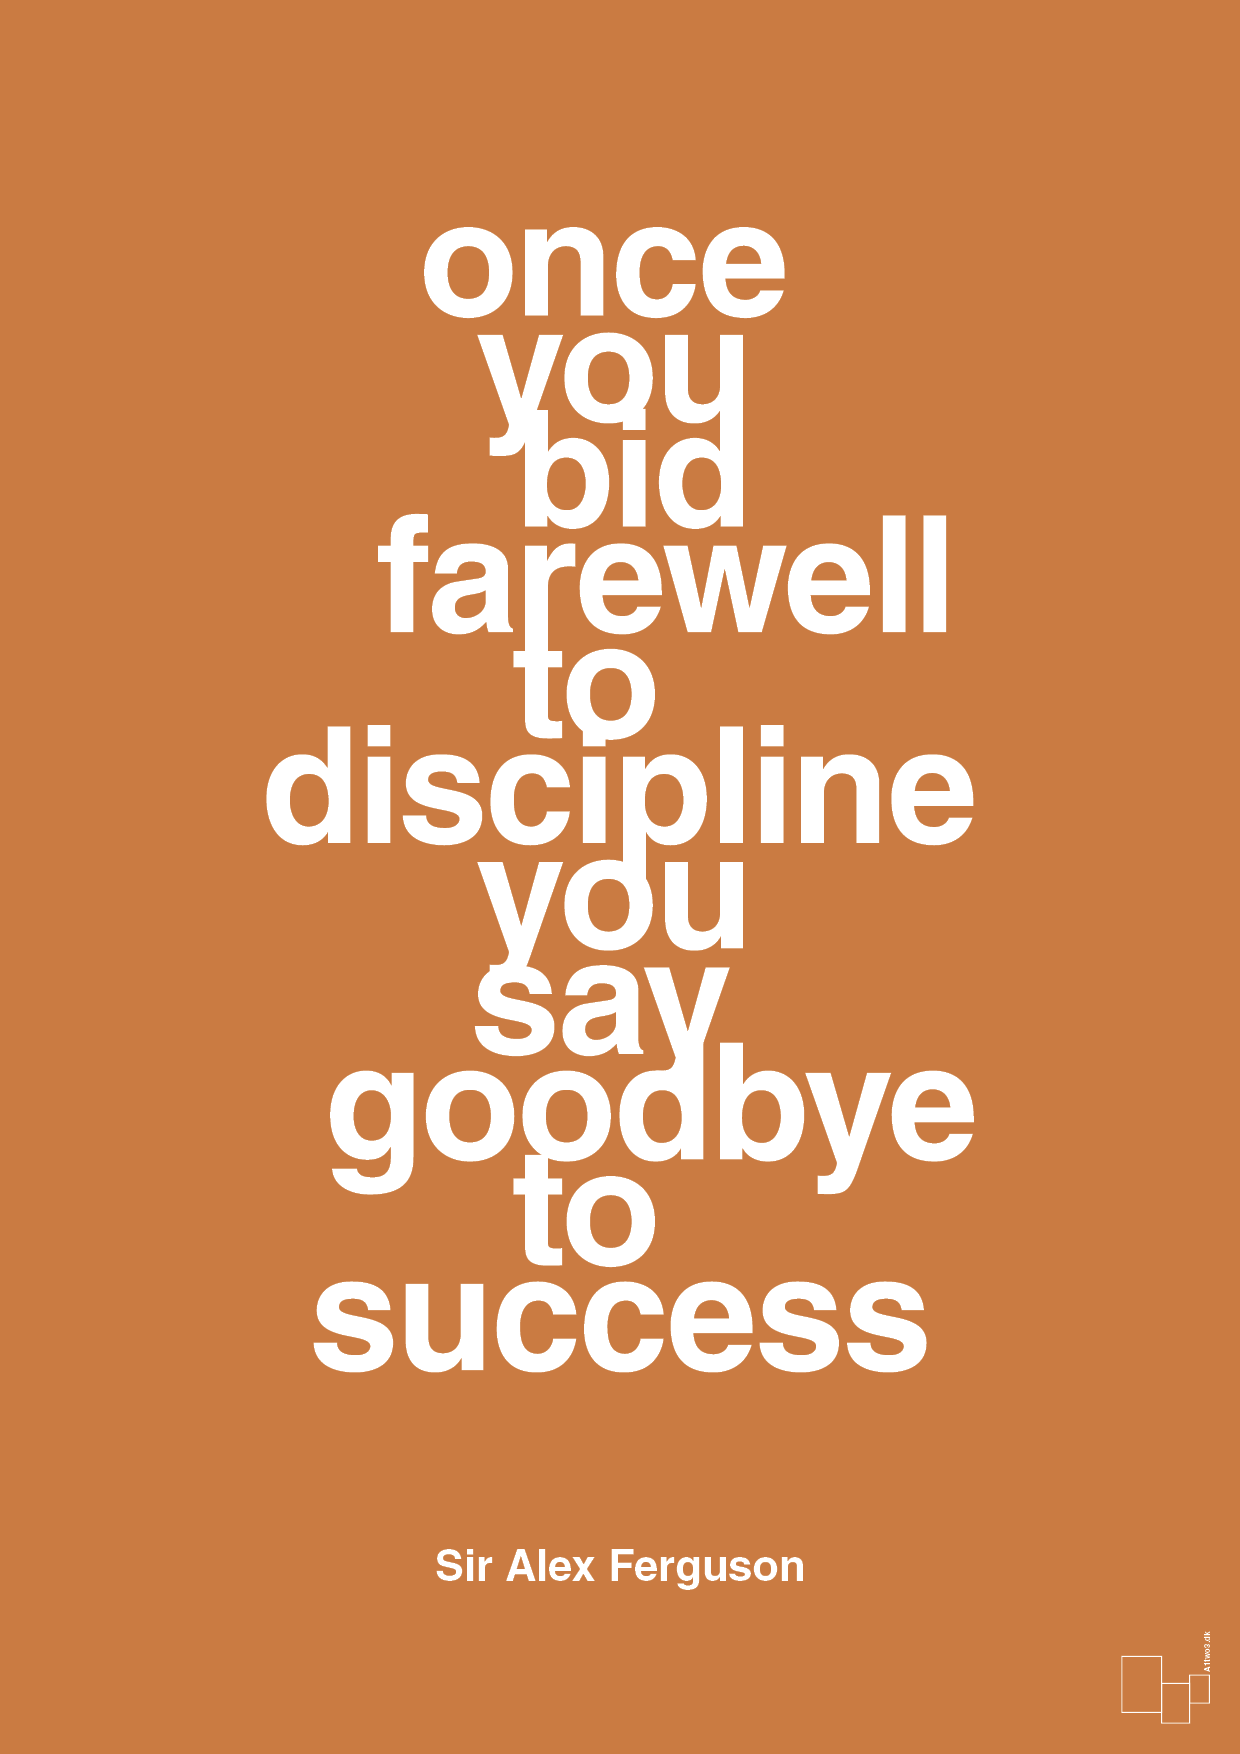 once you bid farewell to discipline you say goodbye to success - Plakat med Citater i Rumba Orange